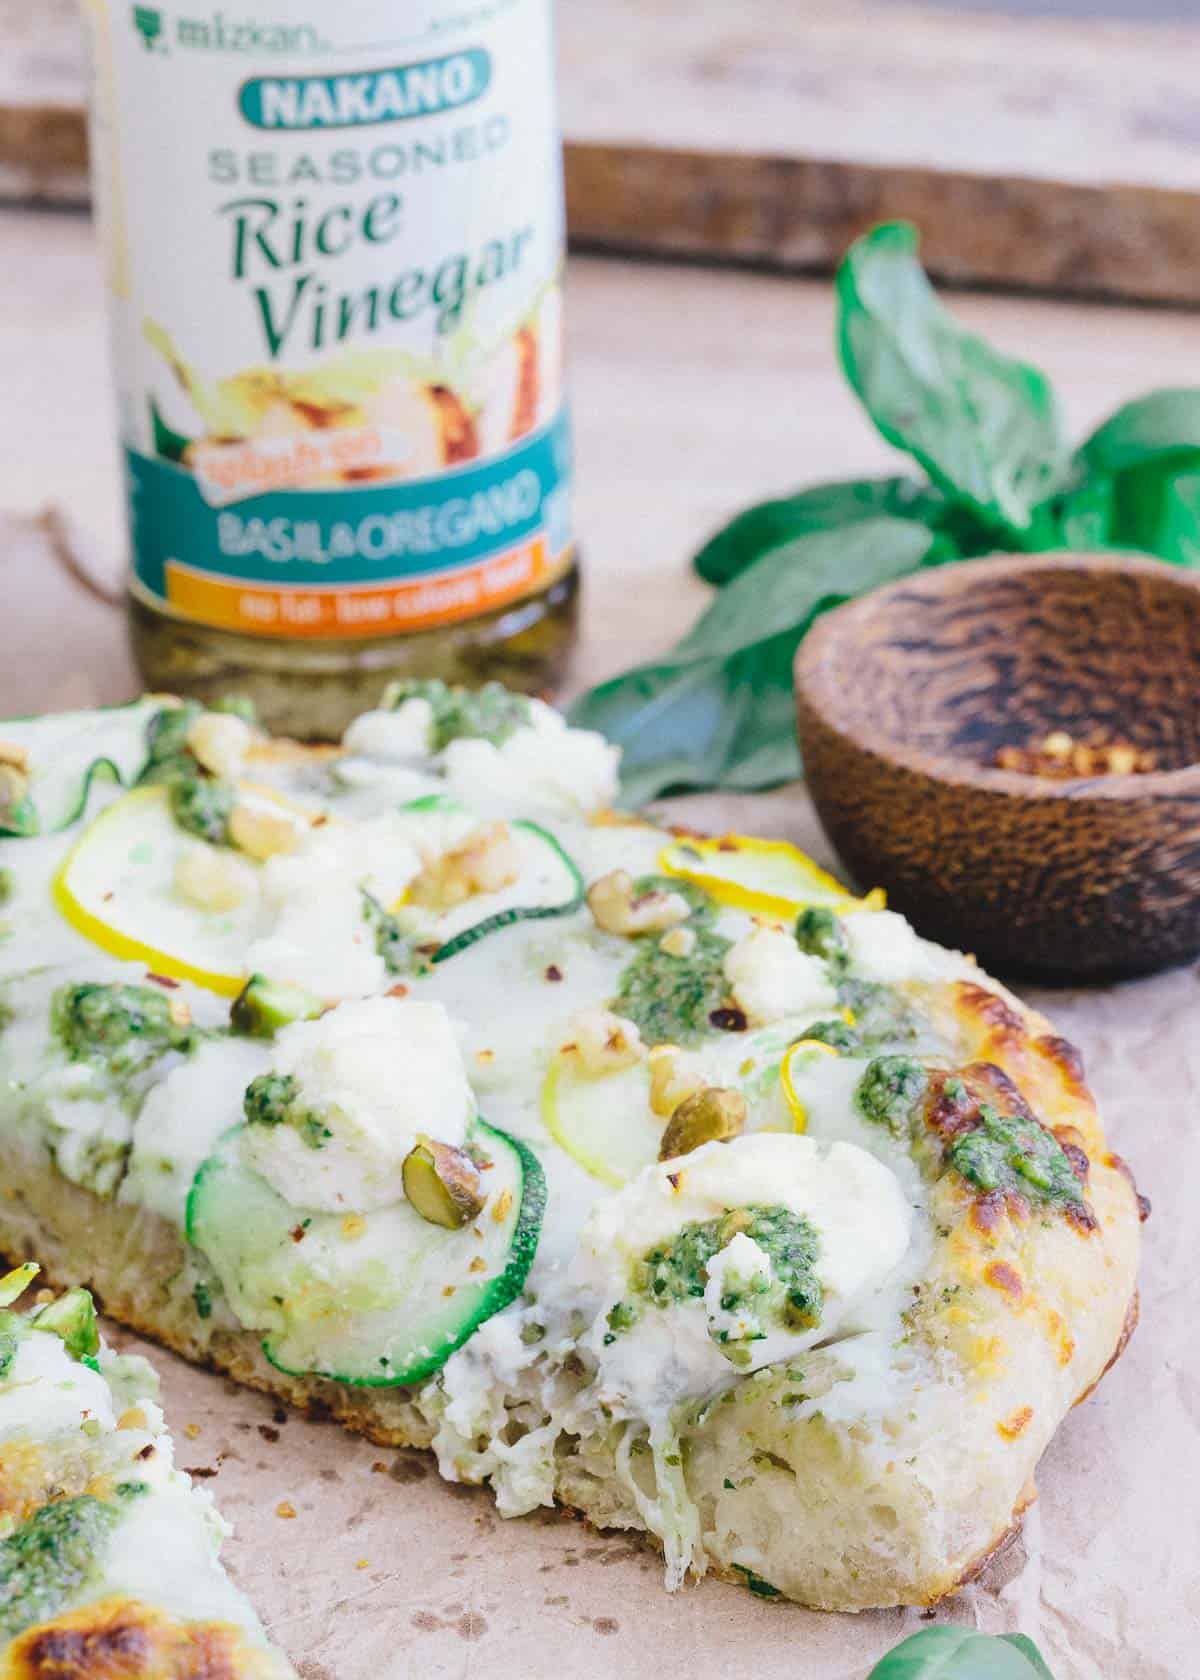 This skillet zucchini pesto pizza is made with Nakano basil and oregano rice vinegar for a tangy twist to traditional pesto.